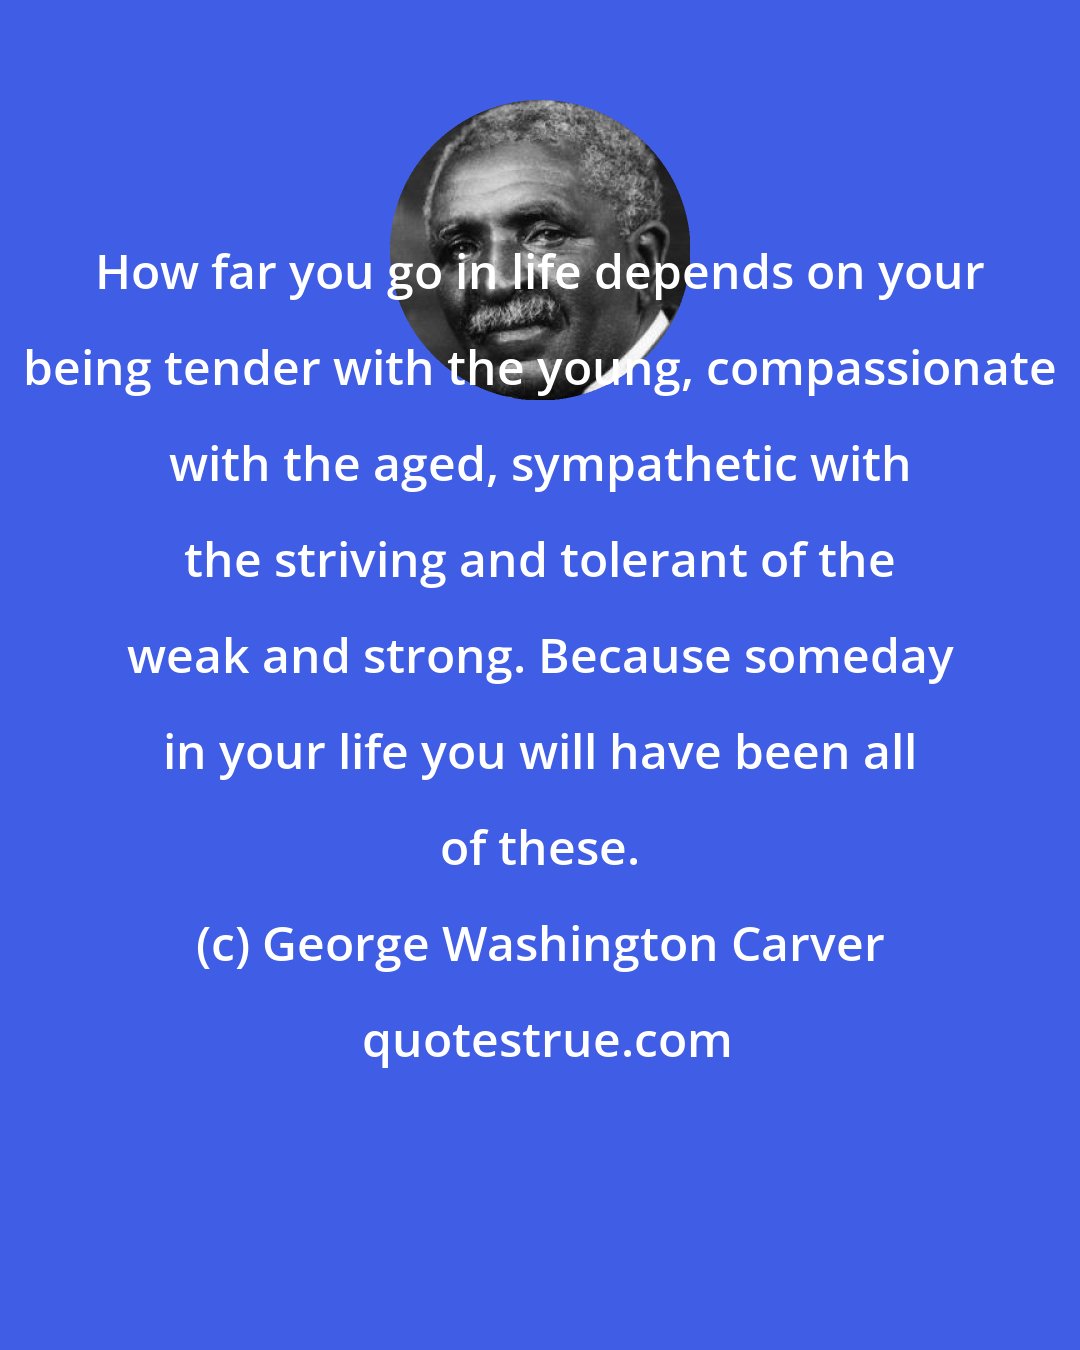 George Washington Carver: How far you go in life depends on your being tender with the young, compassionate with the aged, sympathetic with the striving and tolerant of the weak and strong. Because someday in your life you will have been all of these.